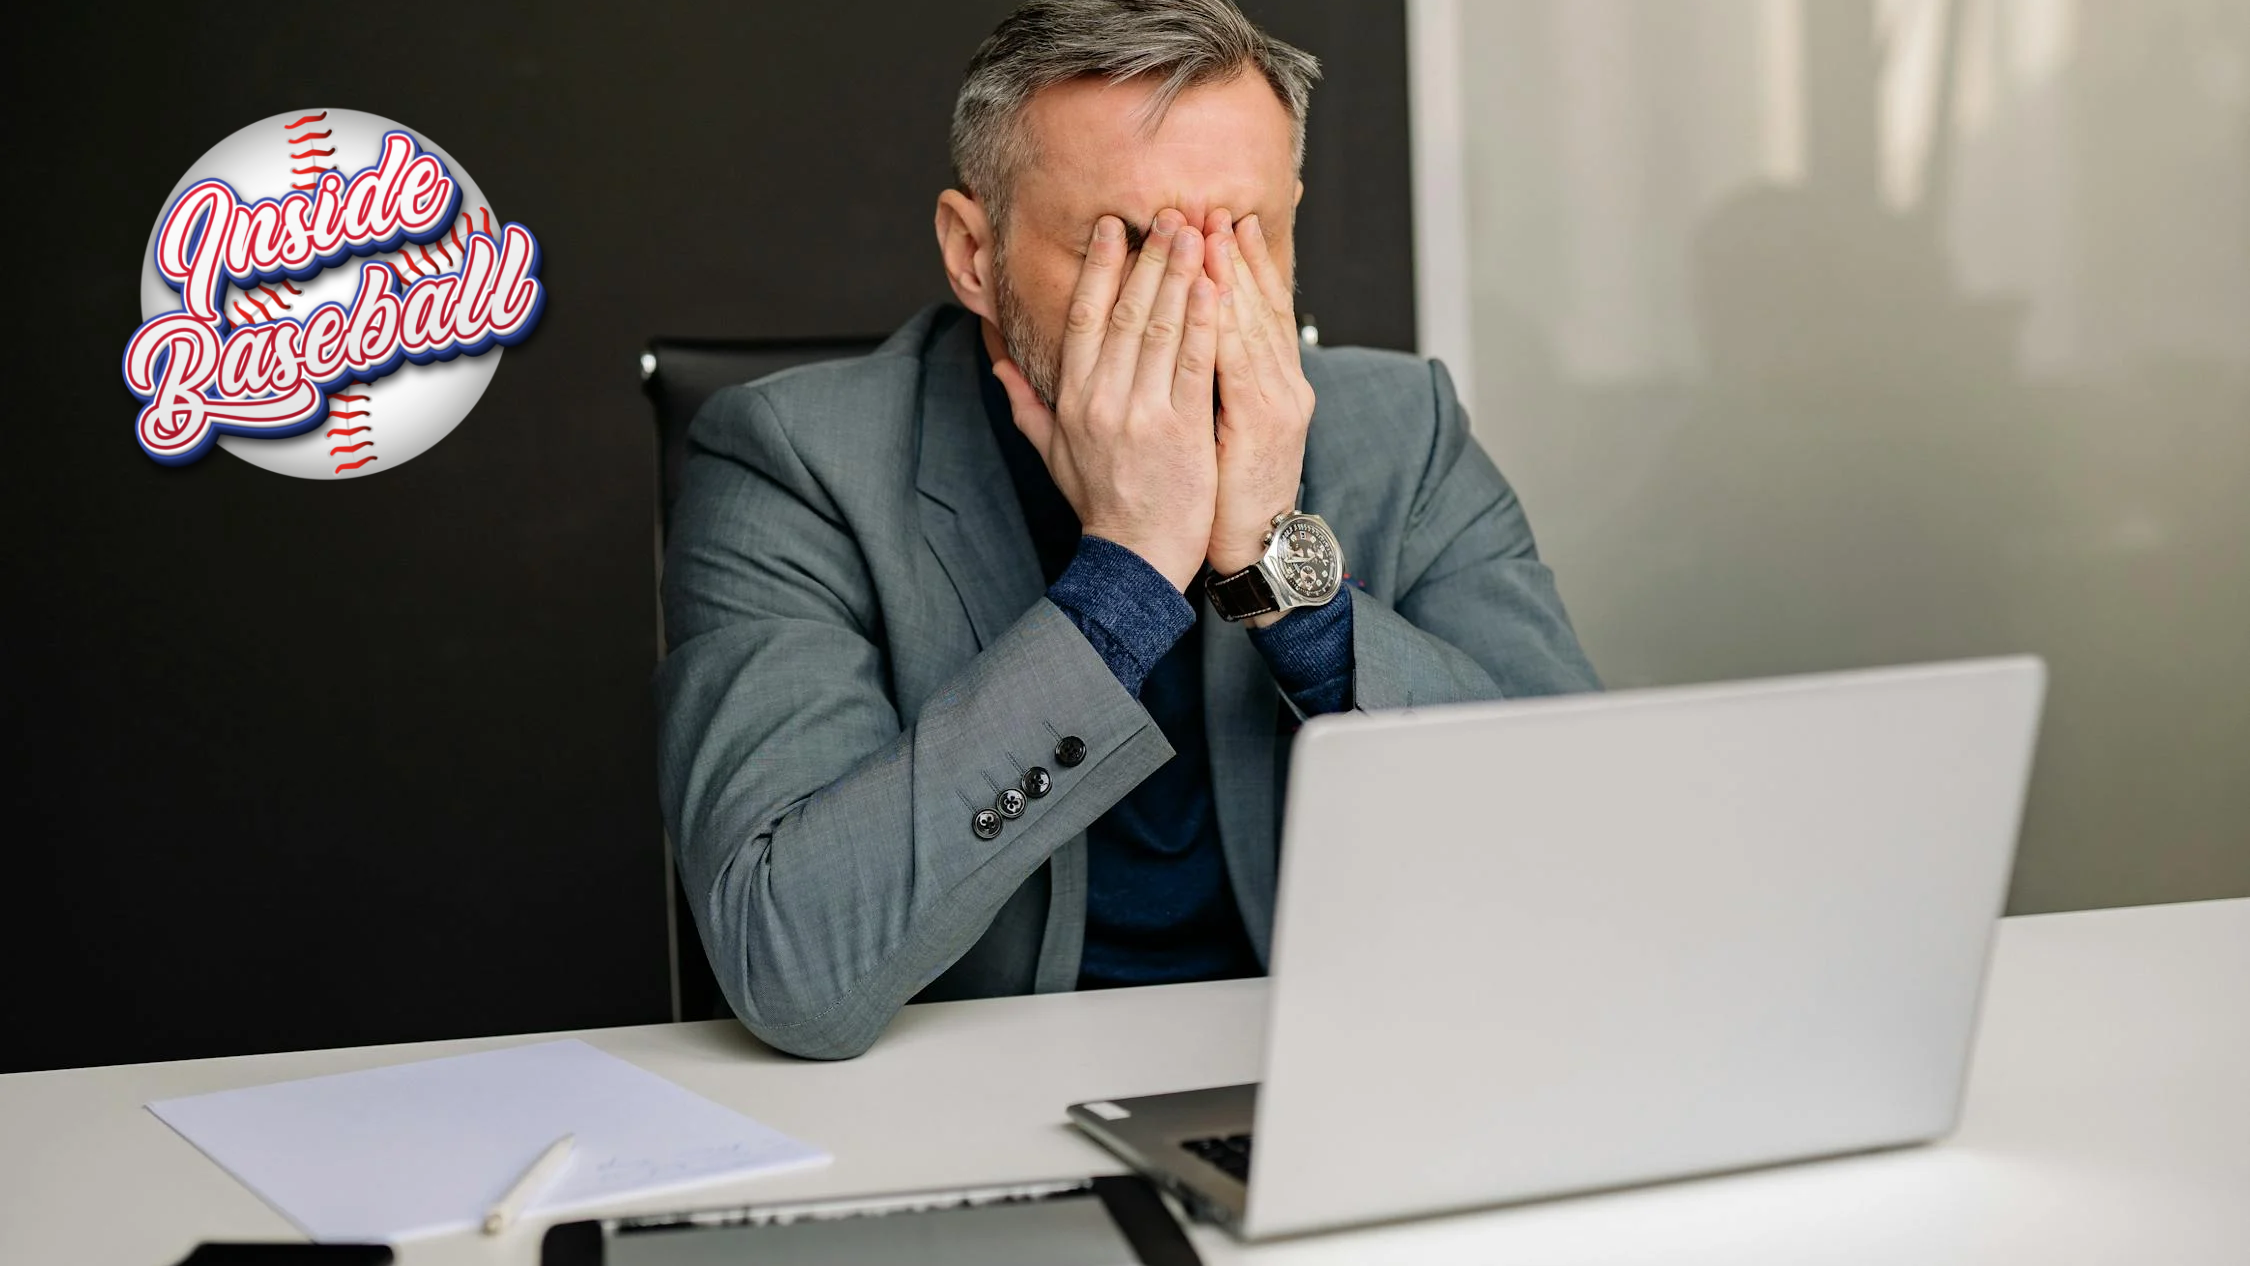 A man in a suit jacket sits in front of a laptop, holding his face in his hands